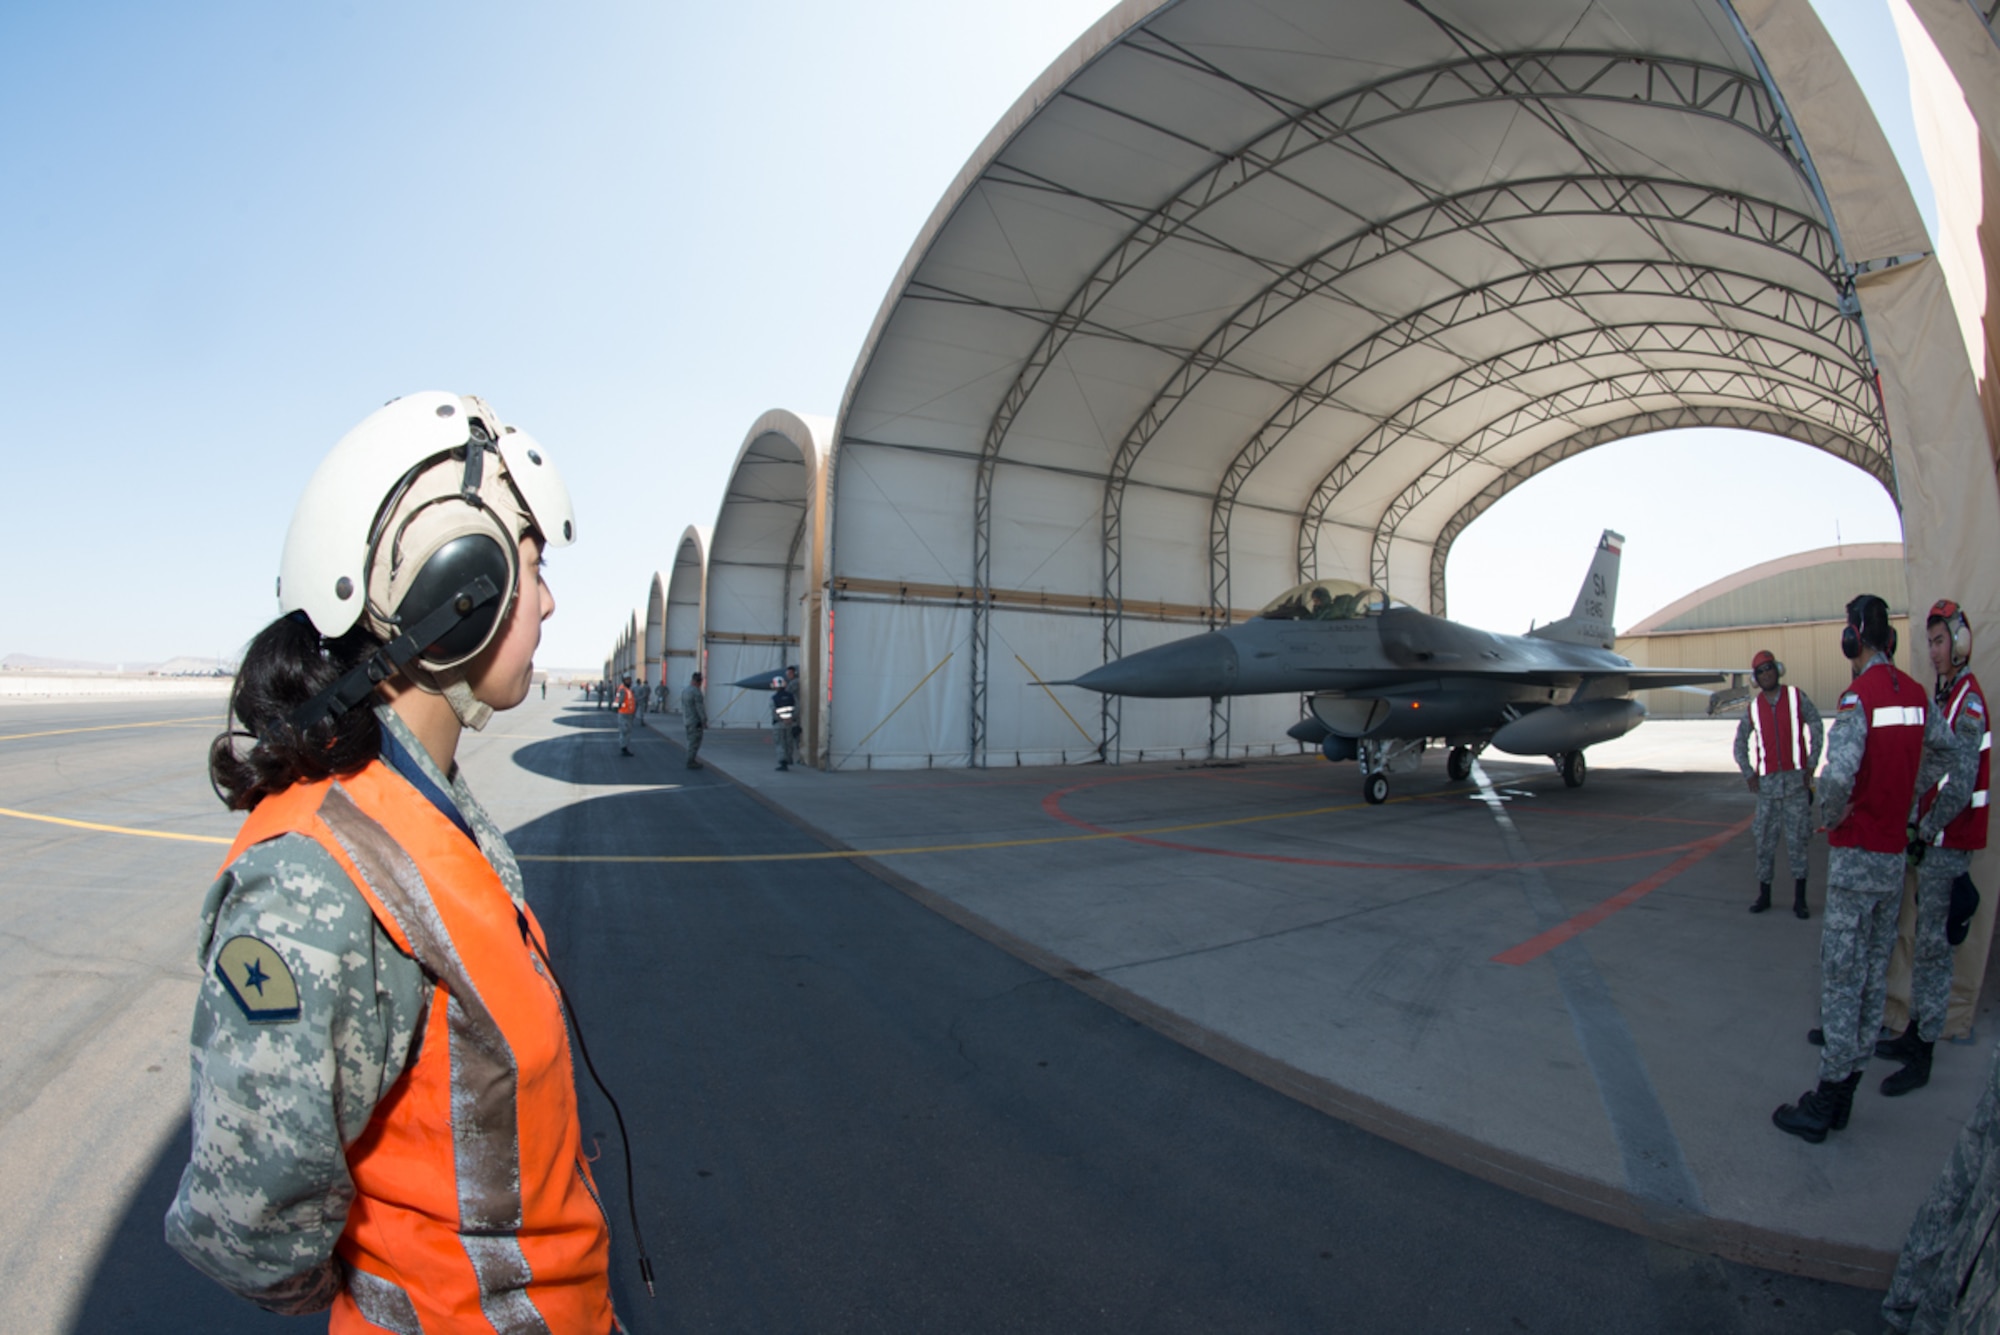 An F-16 crew chief from the Chilean air force prepares to taxi out an F-16 Fighting Falcon from the 149th Fighter Wing, Texas Air National Guard during the State Partnership Program at Cerro Moreno Air Force Base, Chile, as part of a multi-national exercise, Salitre 2014, Oct. 10. Salitre is a Chliean-led exercise event where the U.S. is participating as part of a larger coalition, combined team, focused on increasing interoperability. (Air National Guard photo by Senior Master Sgt. Elizabeth Gilbert/released)